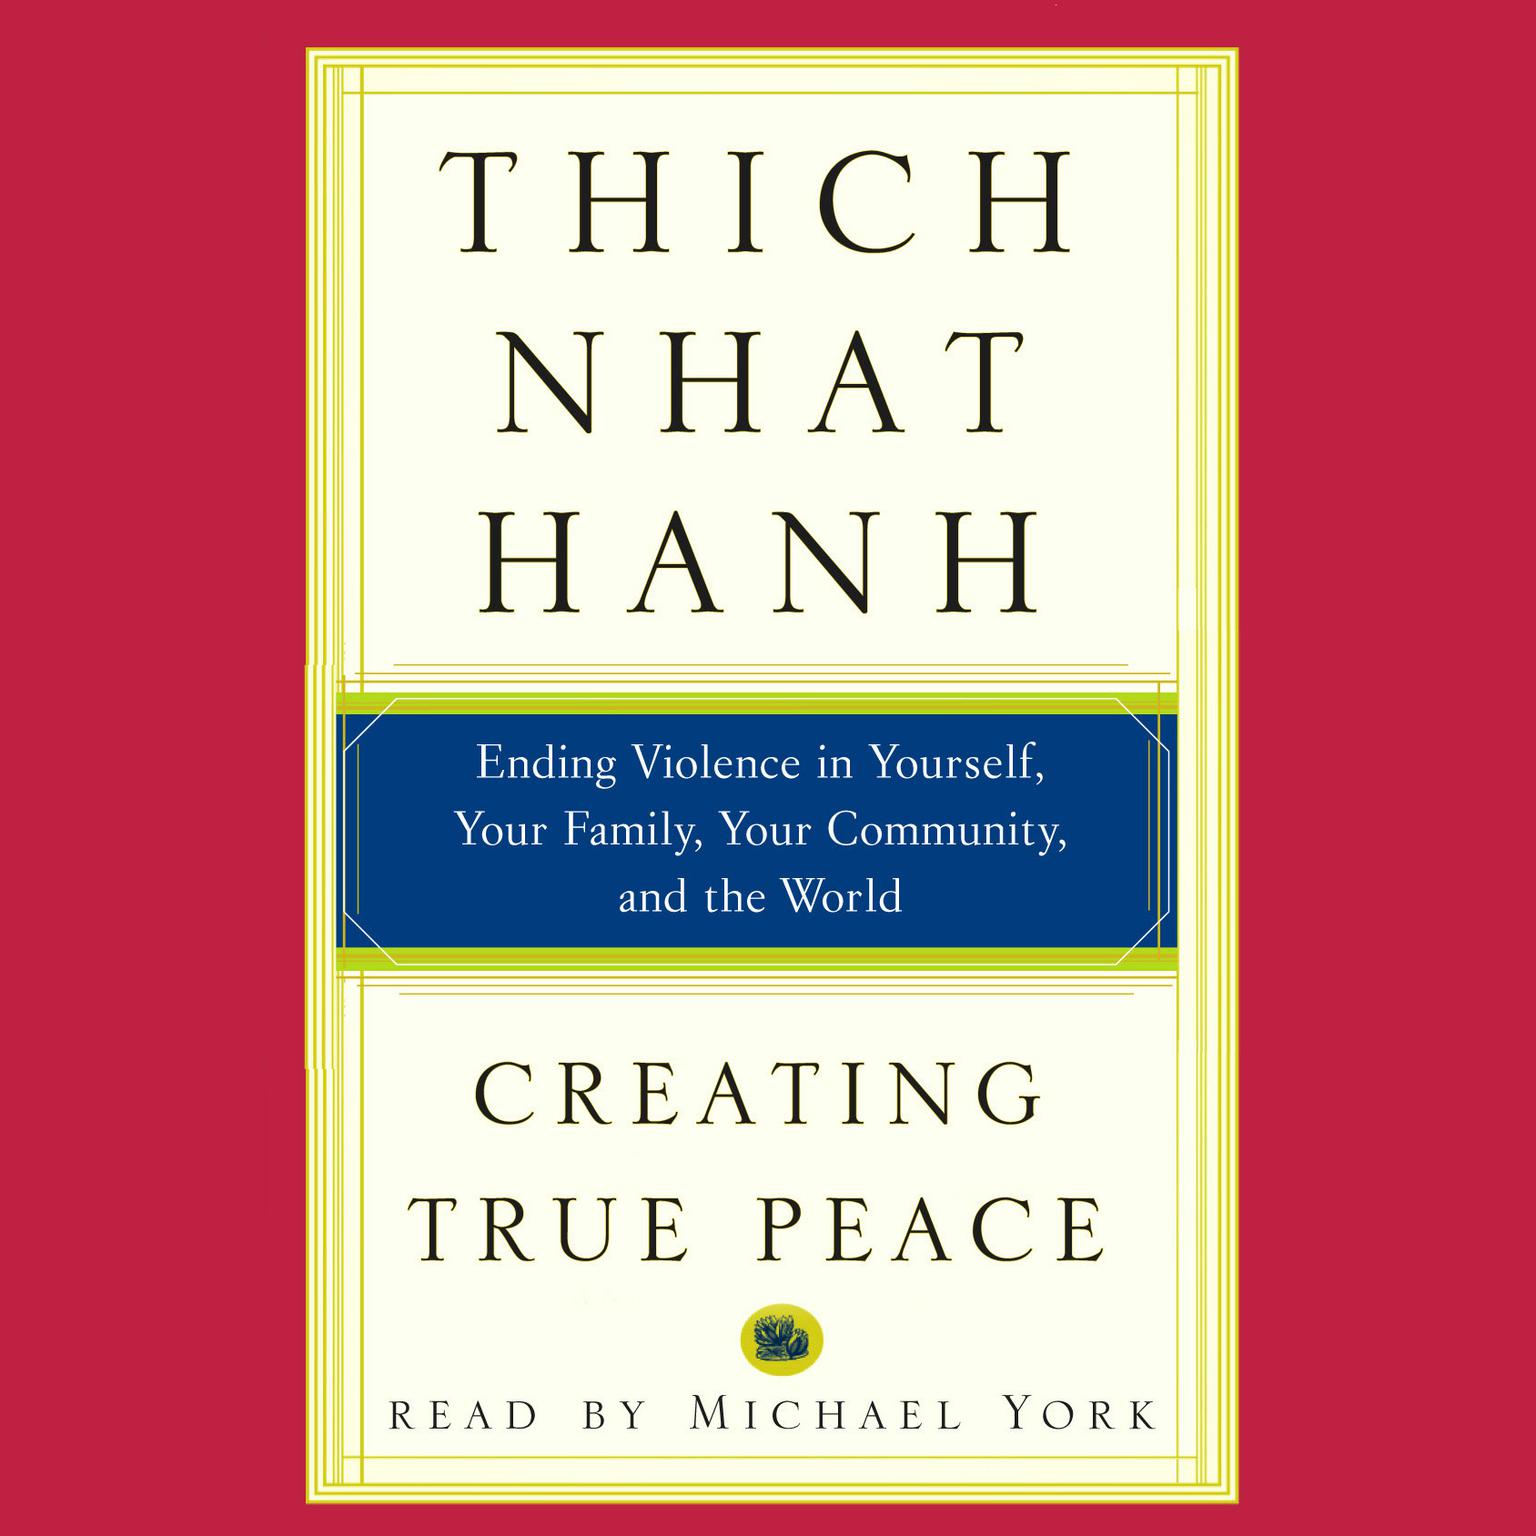 Creating True Peace (Abridged): Ending Violence in Yourself, Your Family, Your Community, and the World Audiobook, by Thich Nhat Hanh